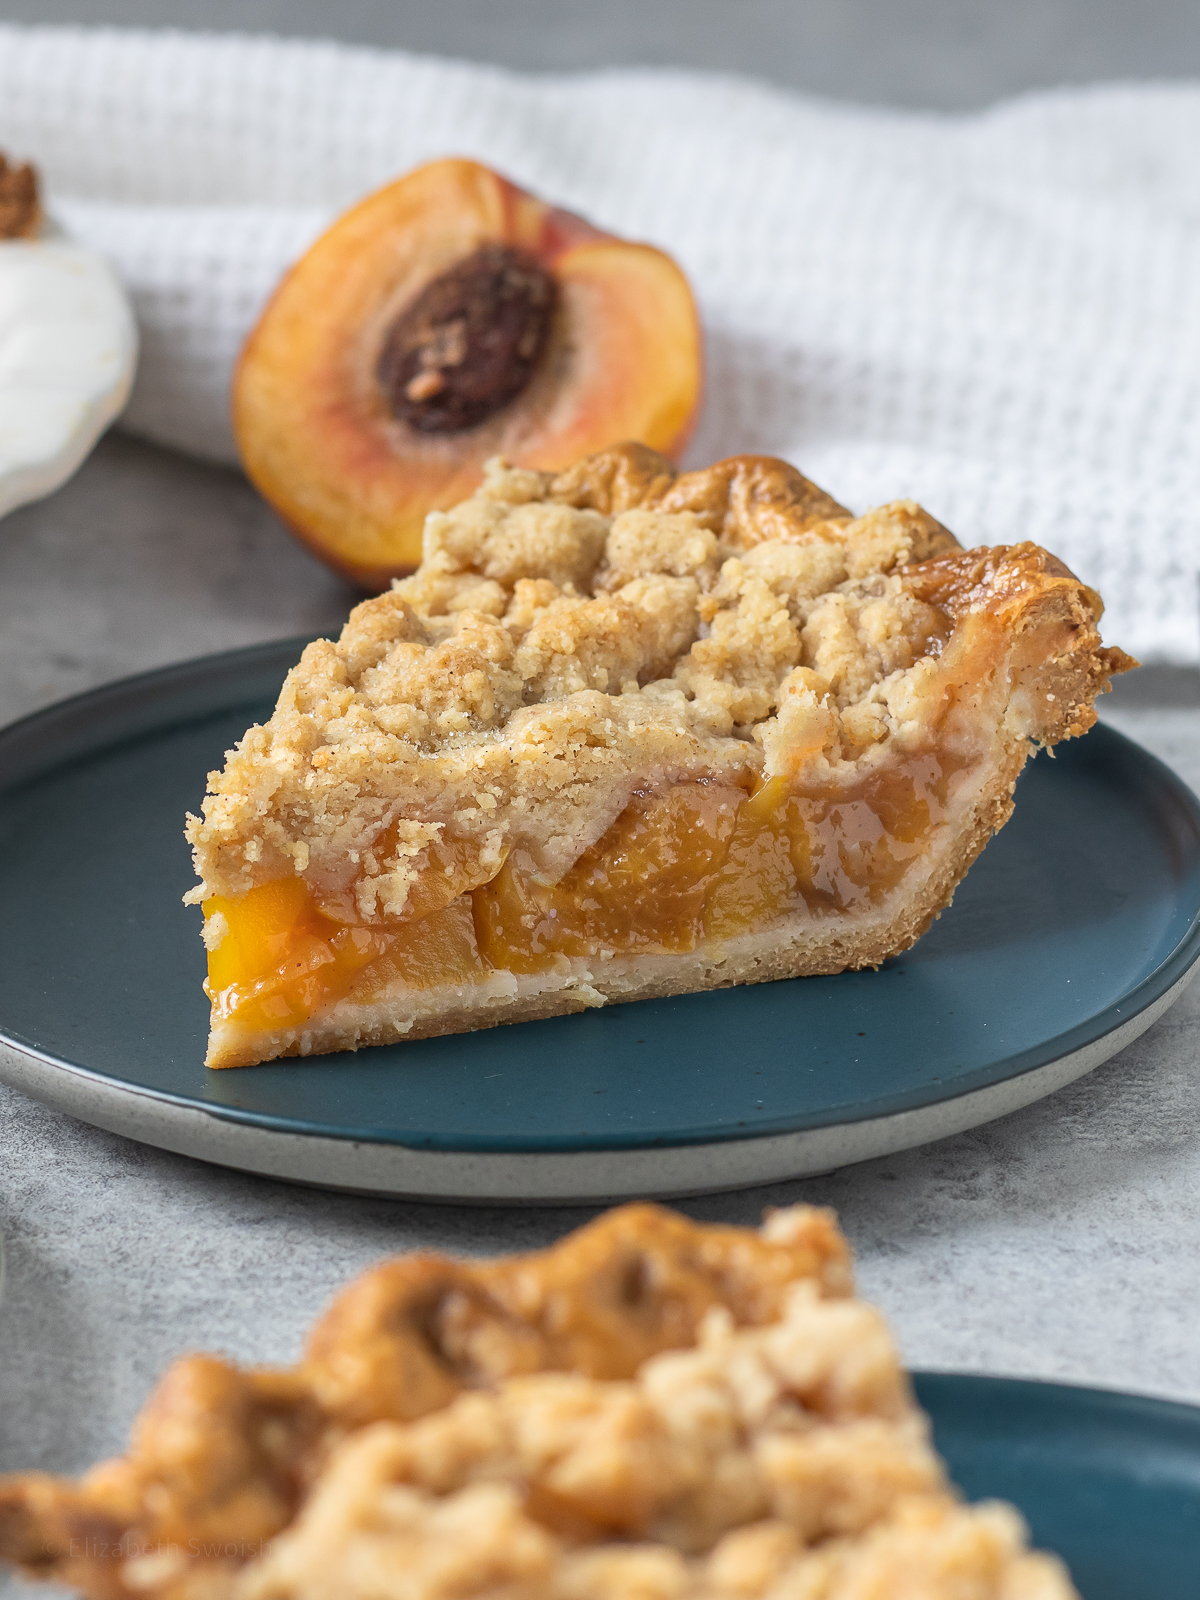 Two slices of pie with flaky crust, crumble topping, and a thick jammy peach mango filling.